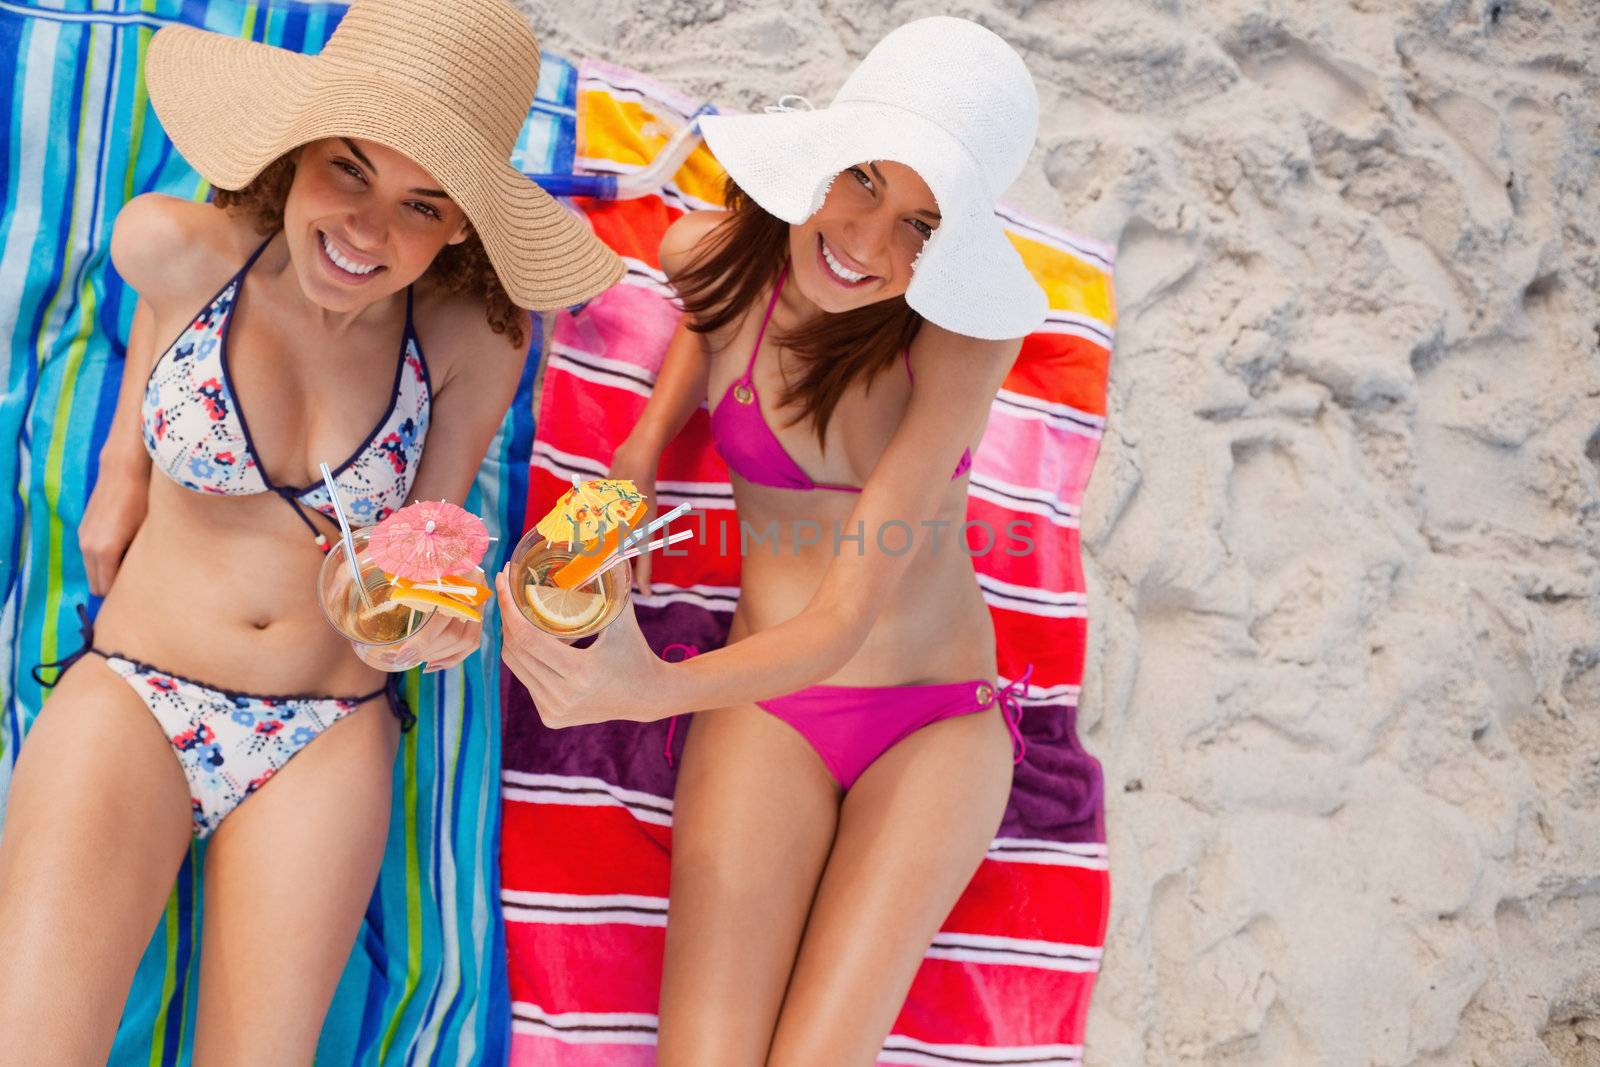 Beautiful women raising their cocktails together while sitting on beach towels